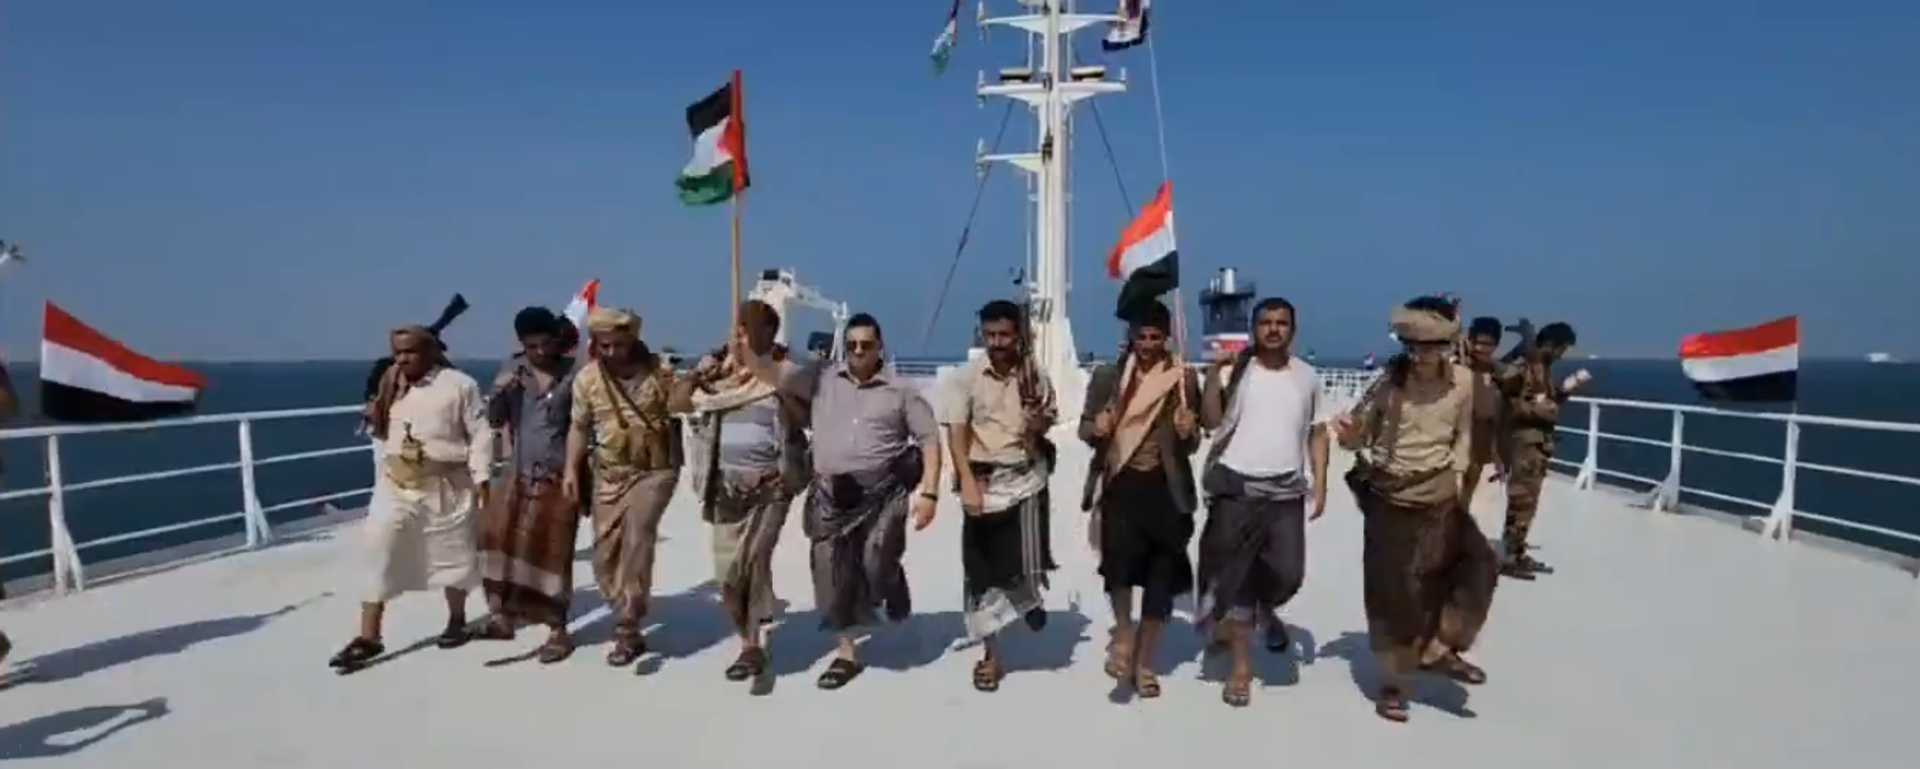 Houthis do their traditional war dance aboard the Galaxy Leader after seizing the Israeli-owned ro-ro car transporter. Screengrab of social media video. - Sputnik International, 1920, 15.02.2024